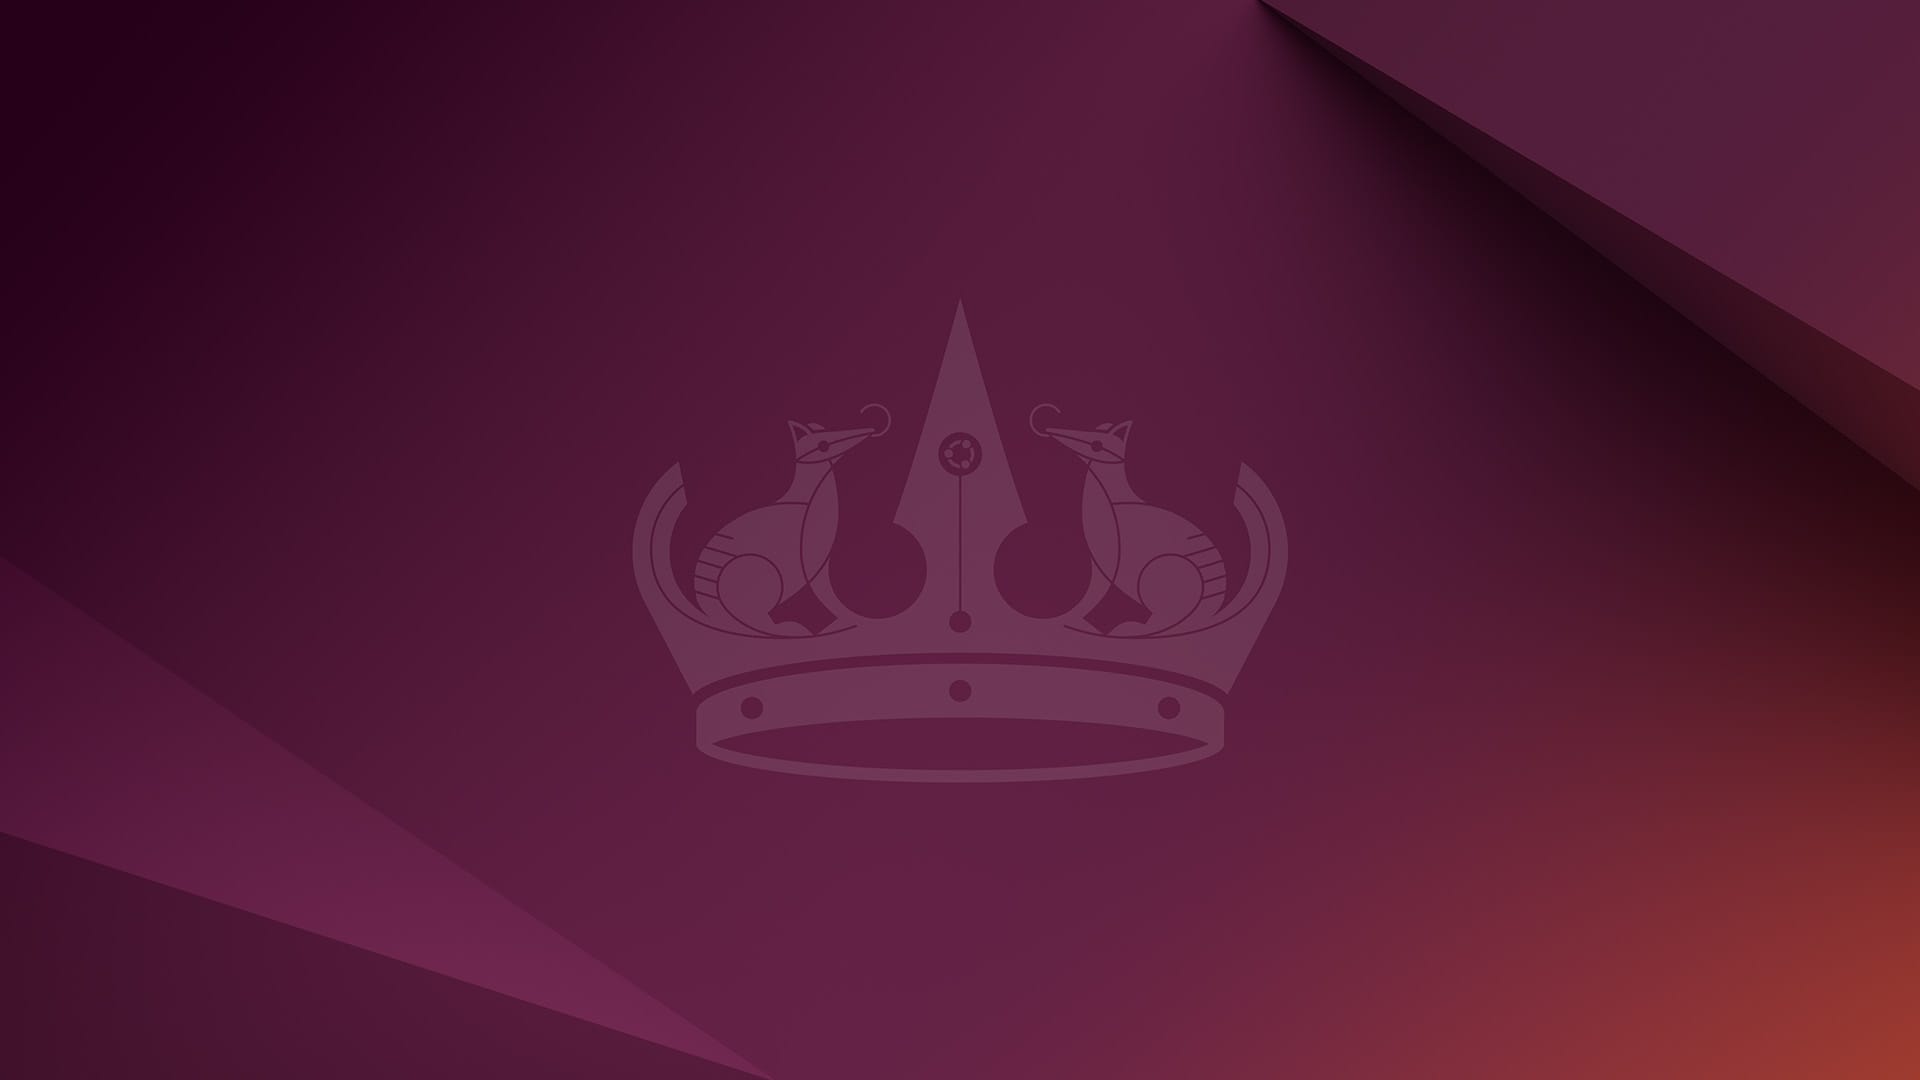 Ubuntu 24.04 LTS Wallpapers Are Here: Don't Miss Them!